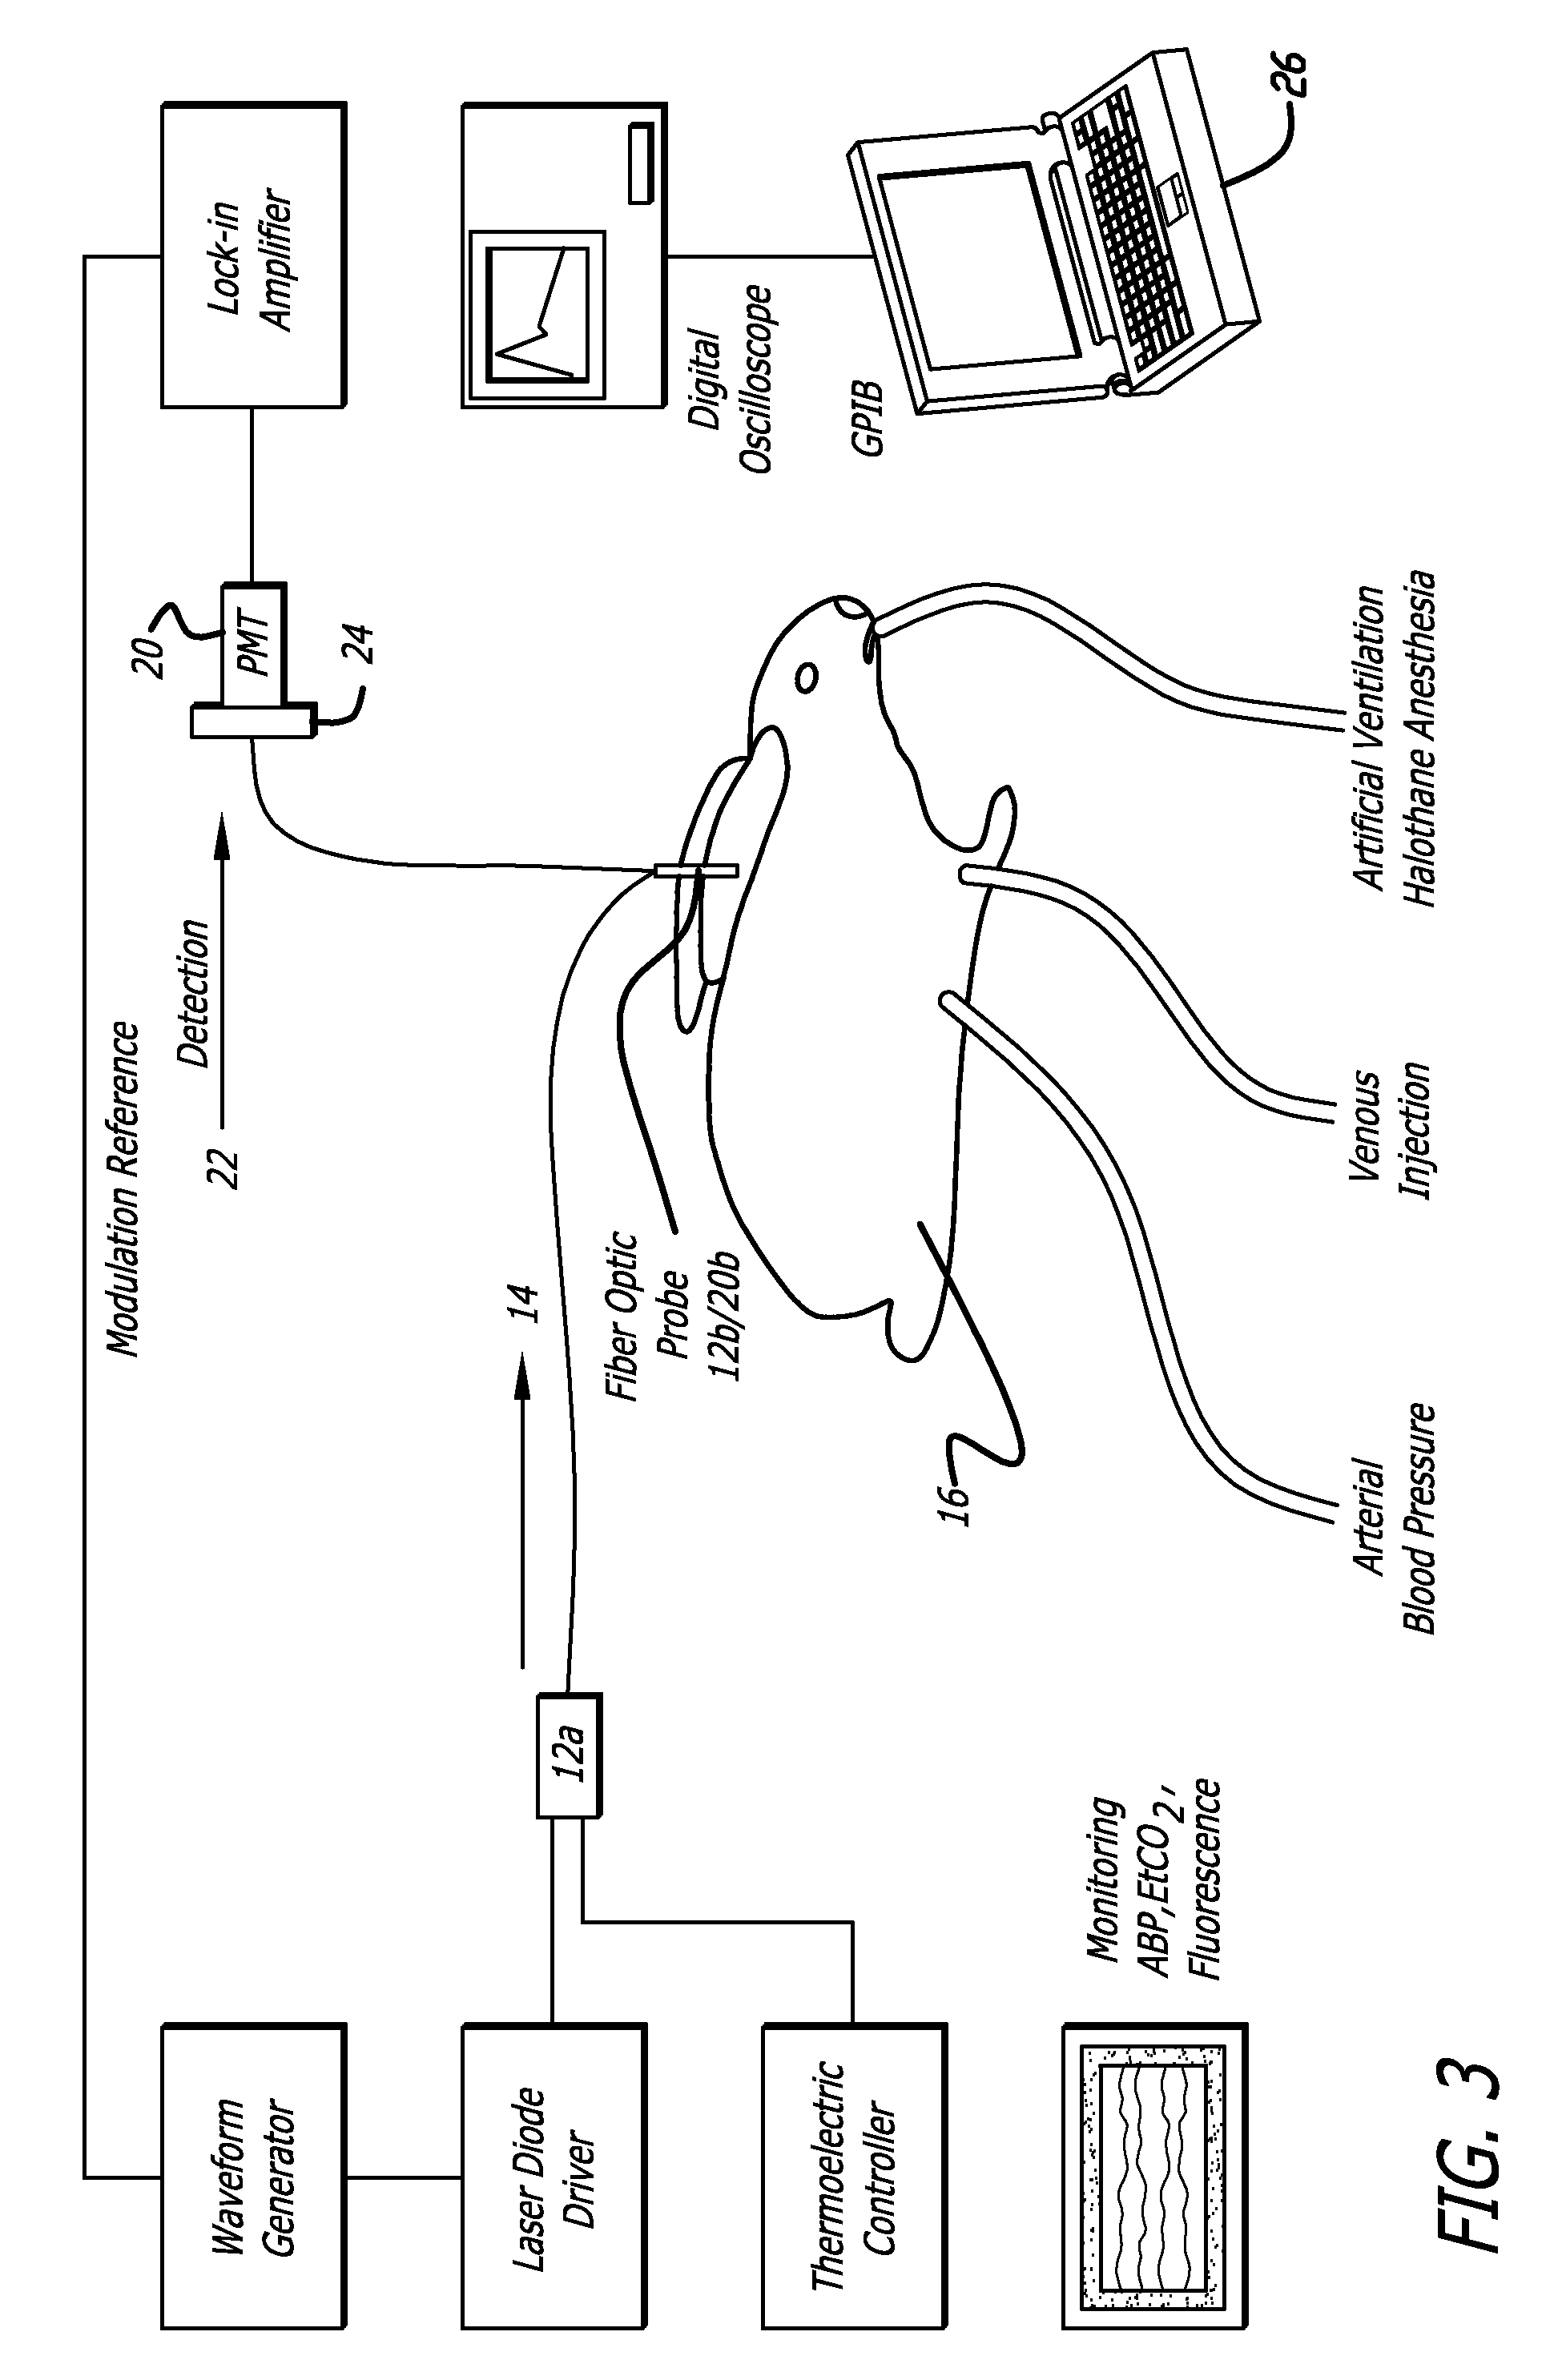 Method for Dye Injection for the Transcutaneous Measurement of Cardiac Output